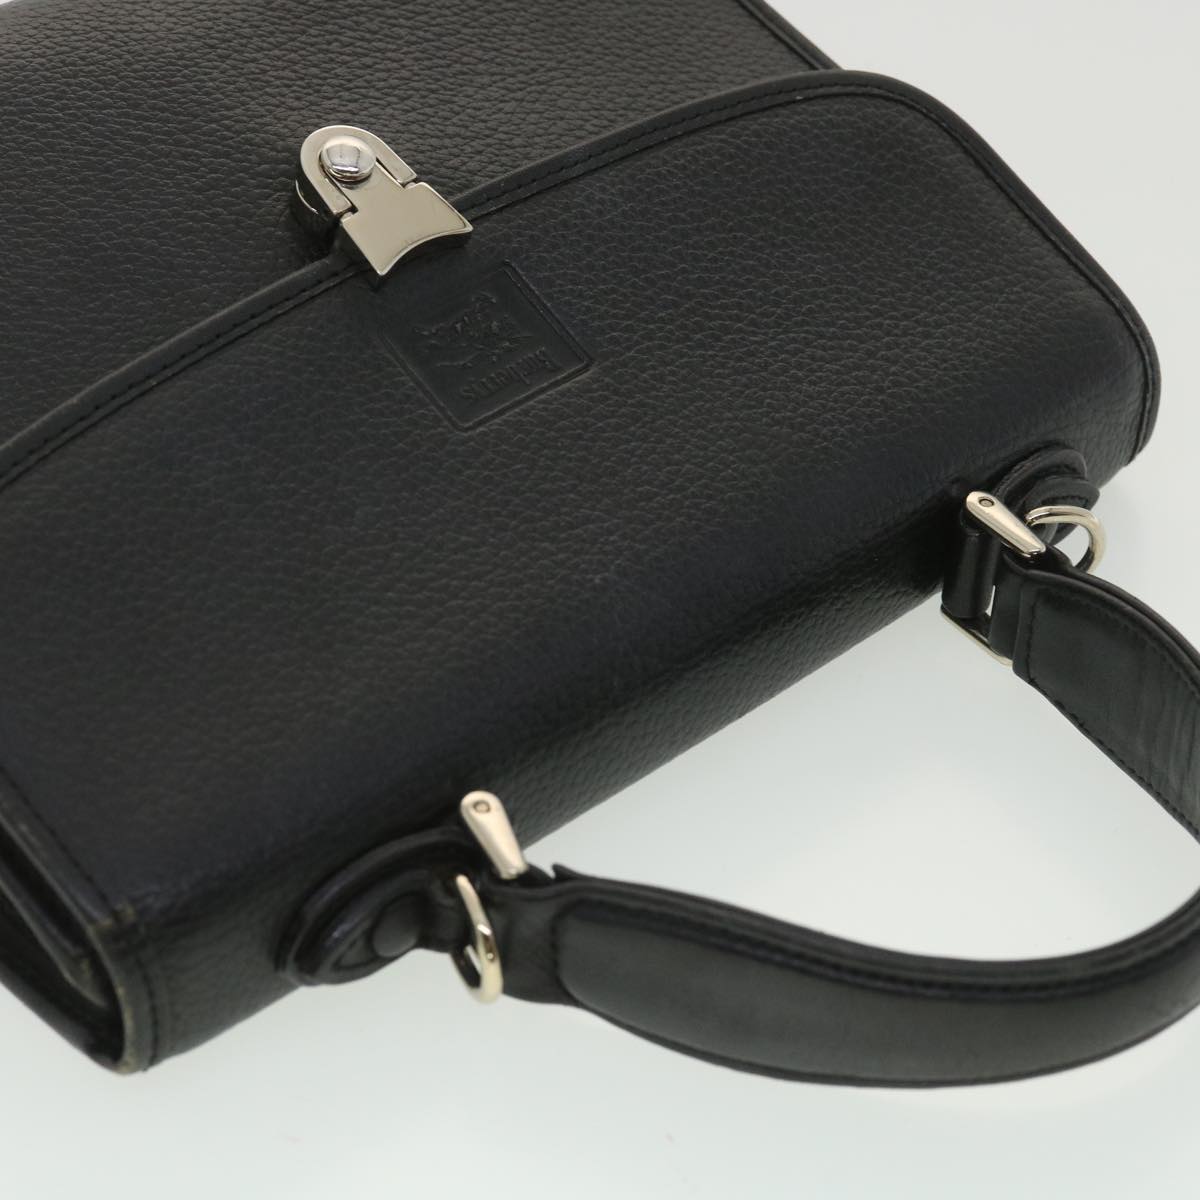 Burberrys Hand Bag Leather Black Auth 36342